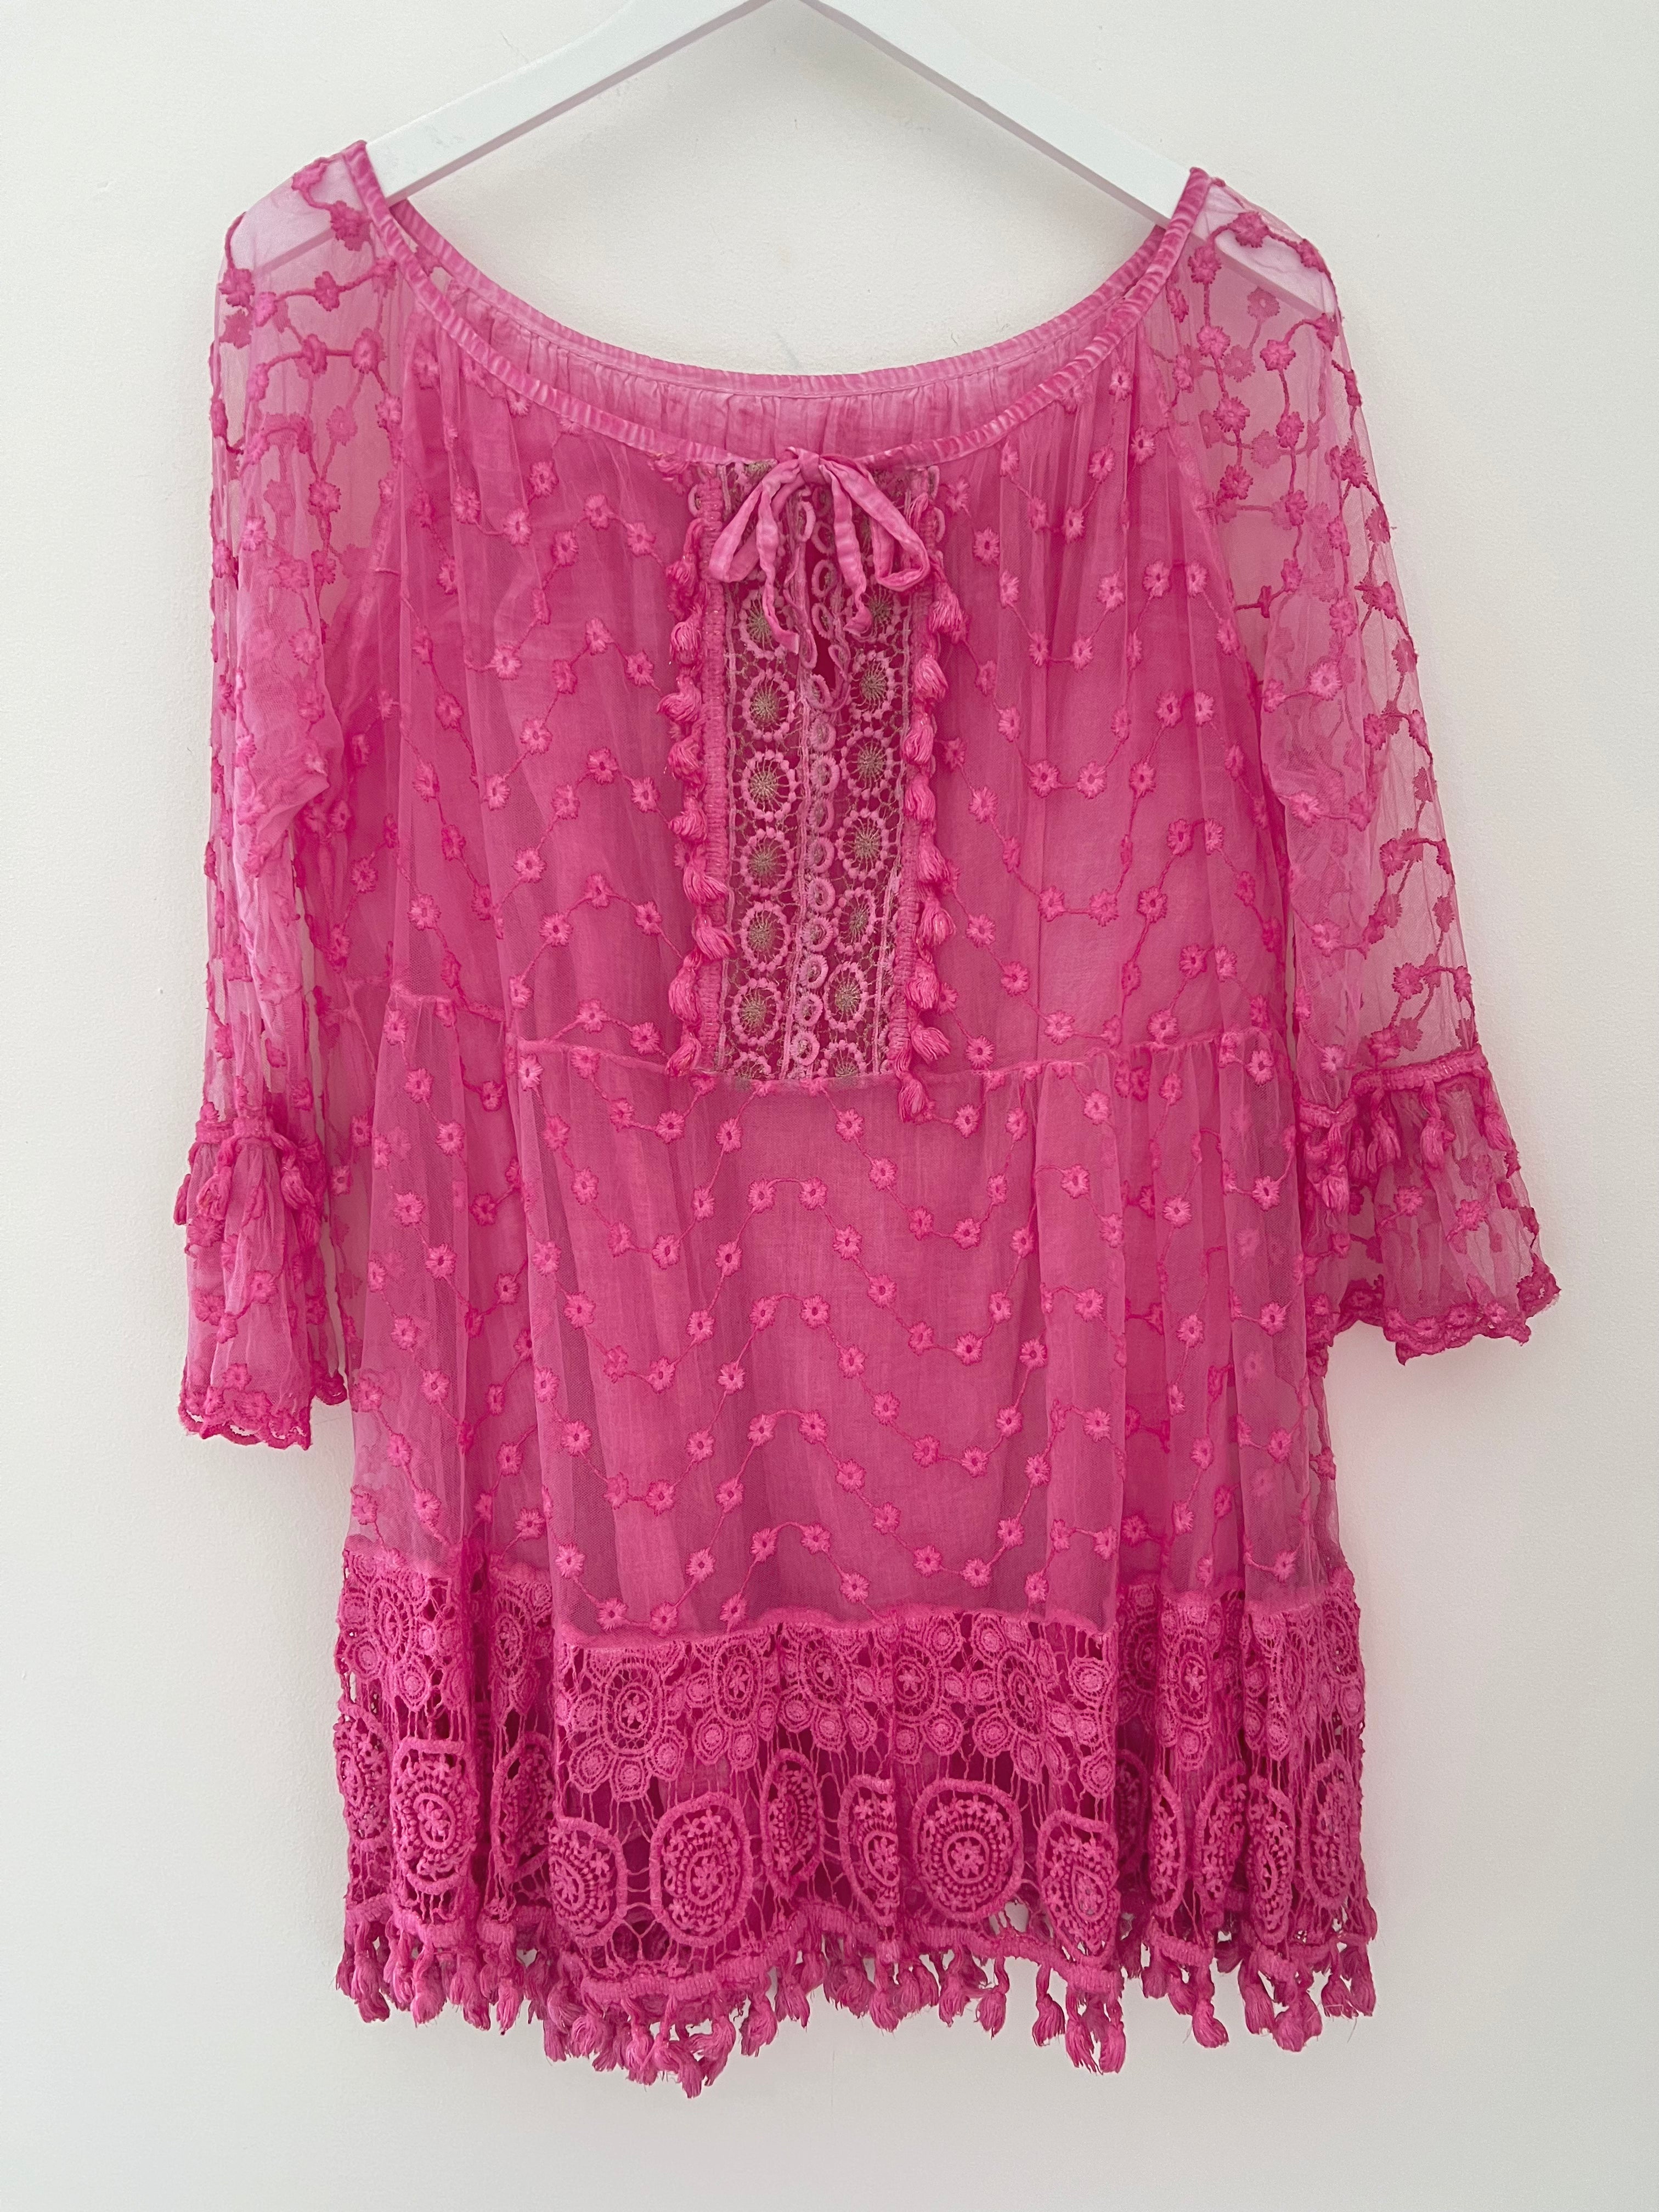 Lace Overlay Top in Pink